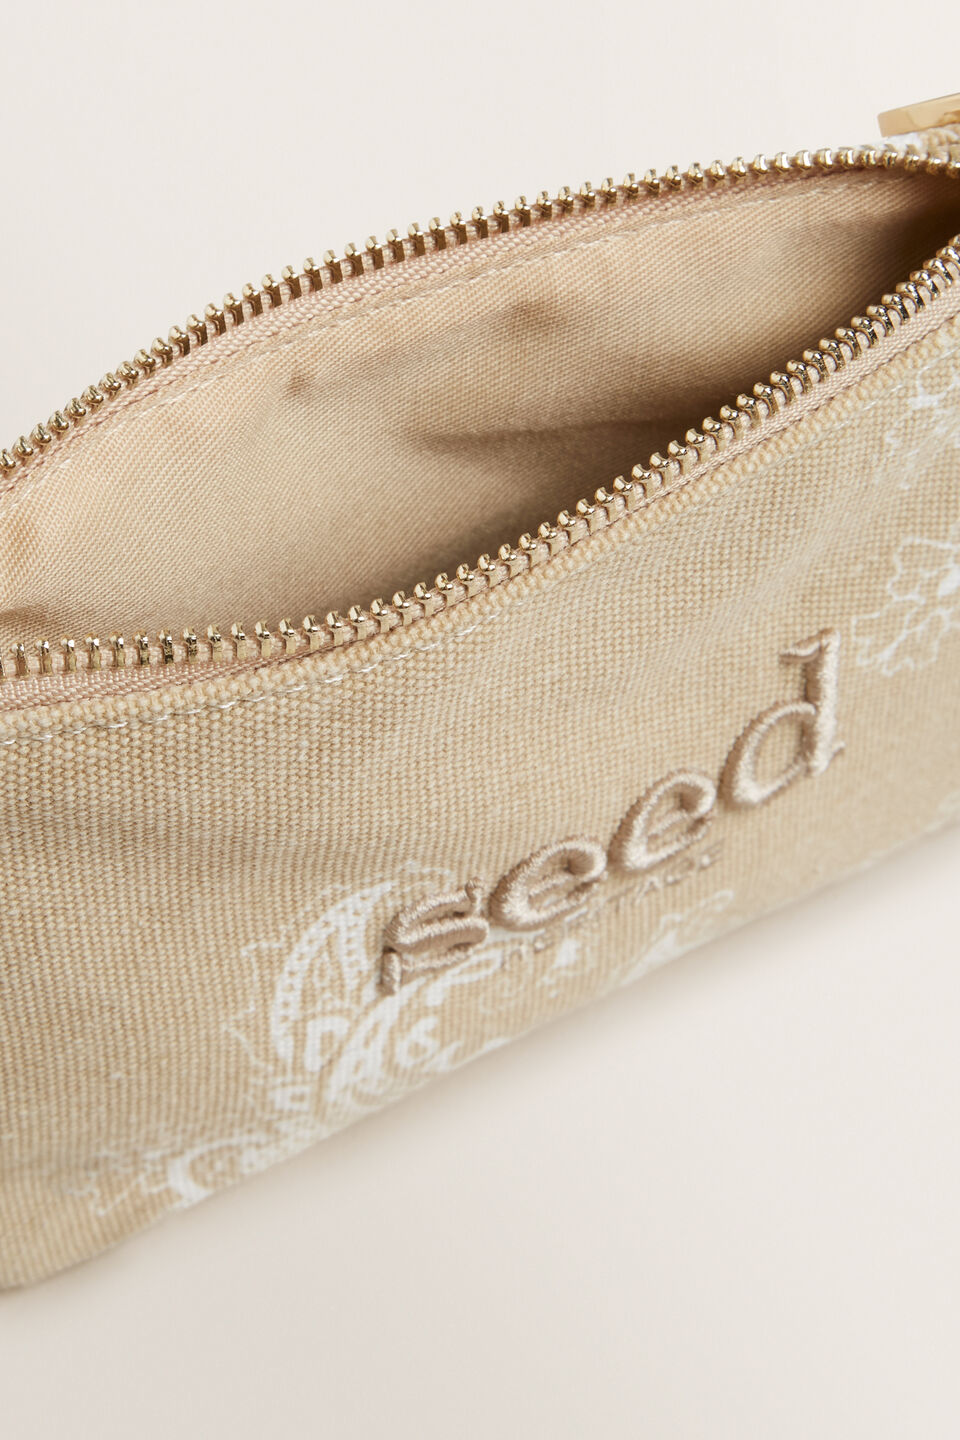 Seed Mini Canvas Pouch  Stonecrop